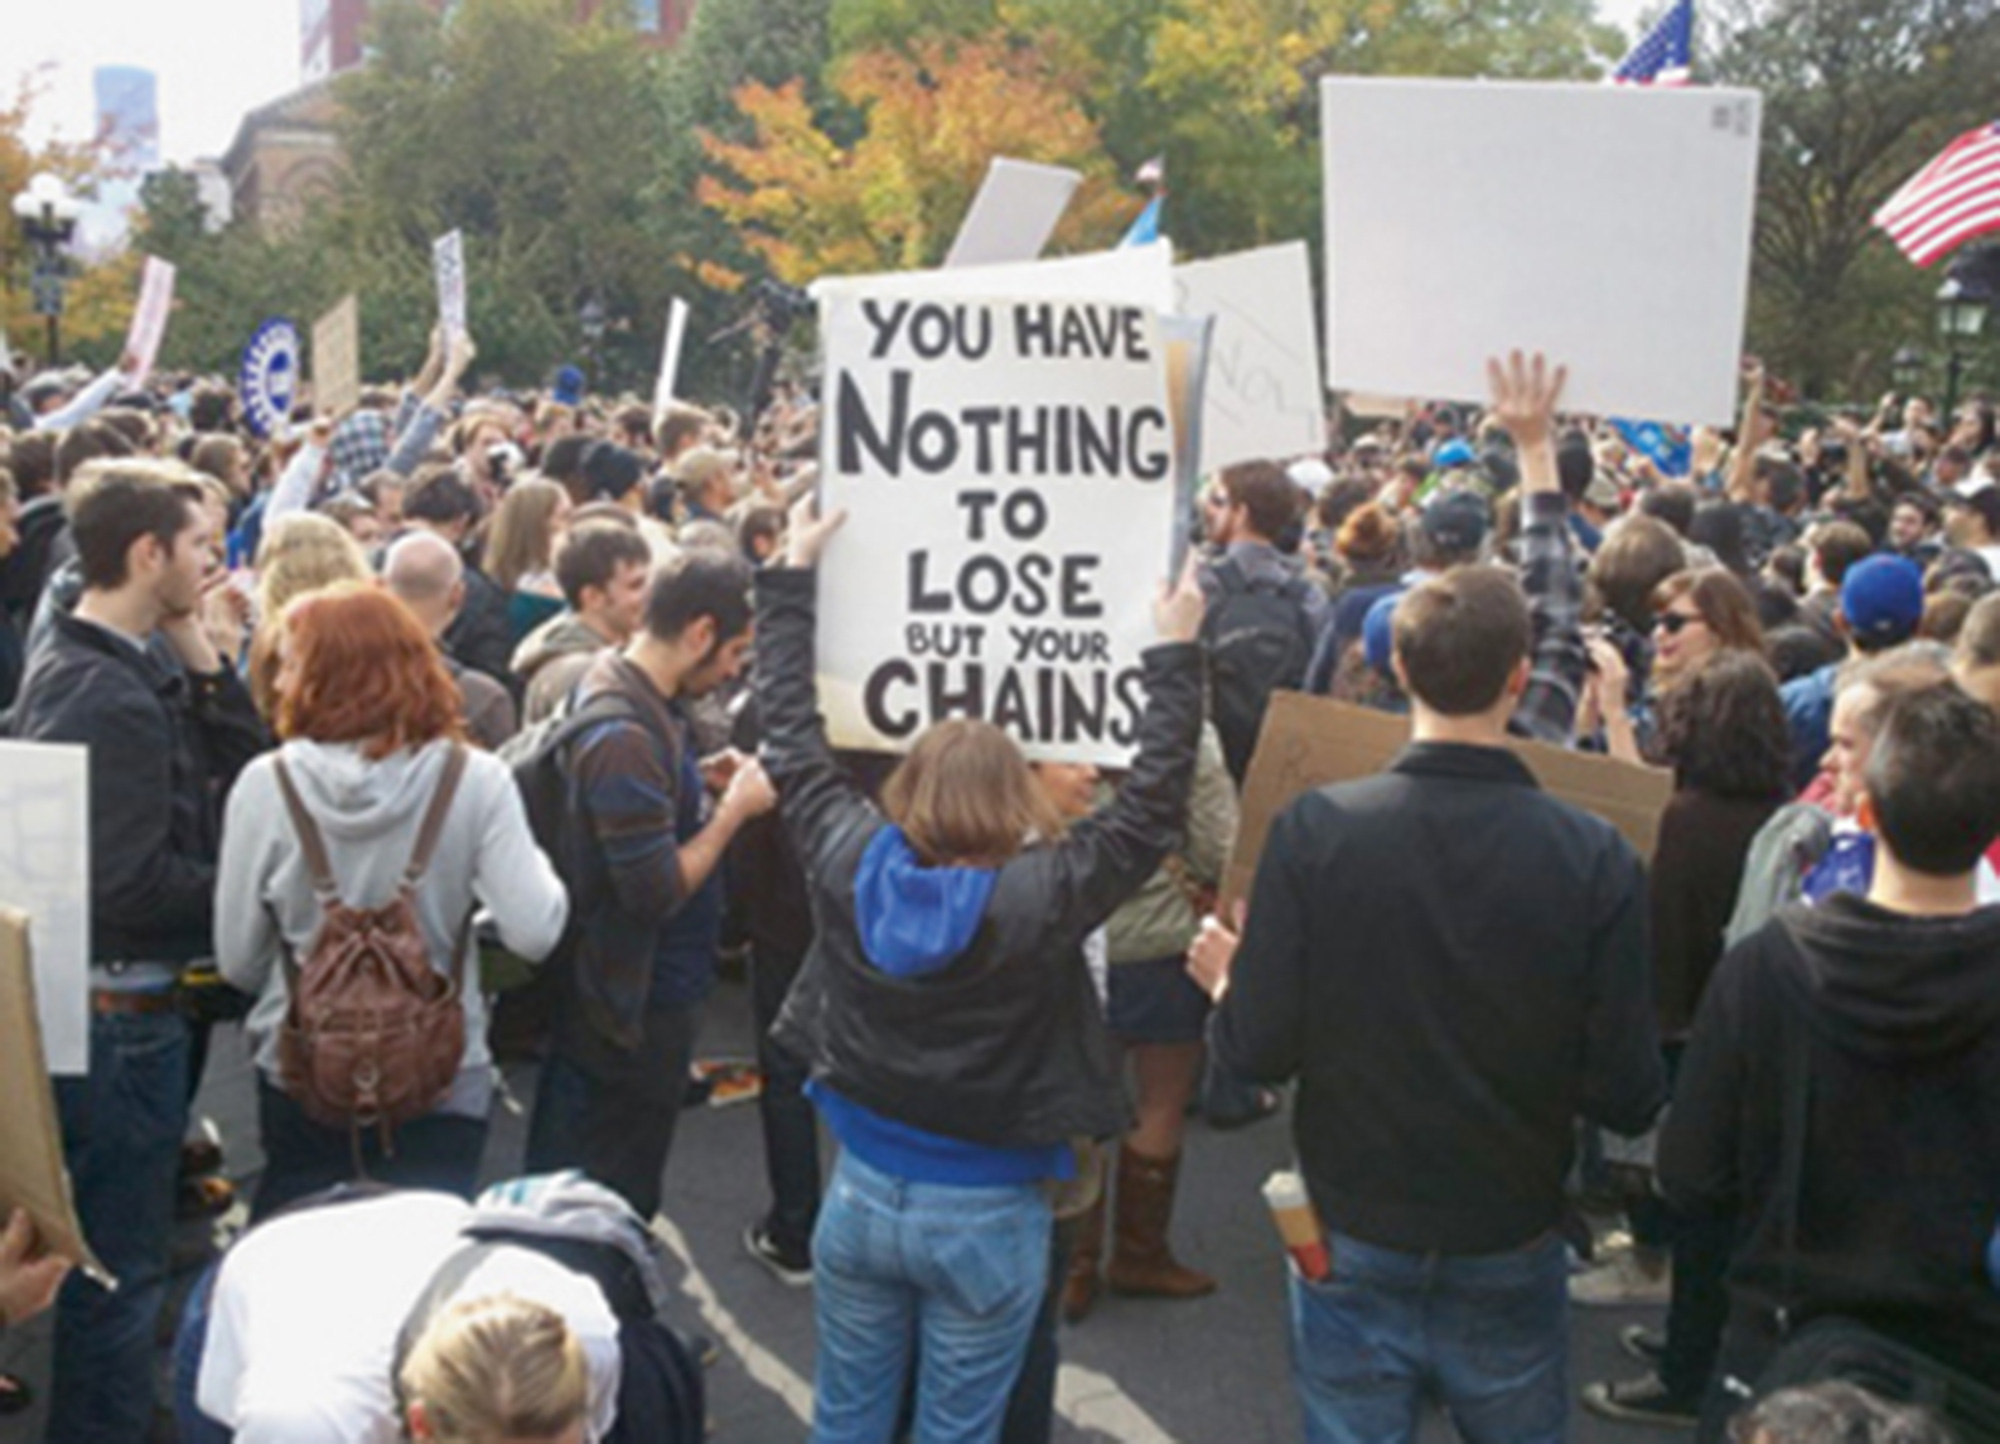 A twenty eleven photograph of a person holding a protest sign that reads “You have nothing to lose but your chains.”